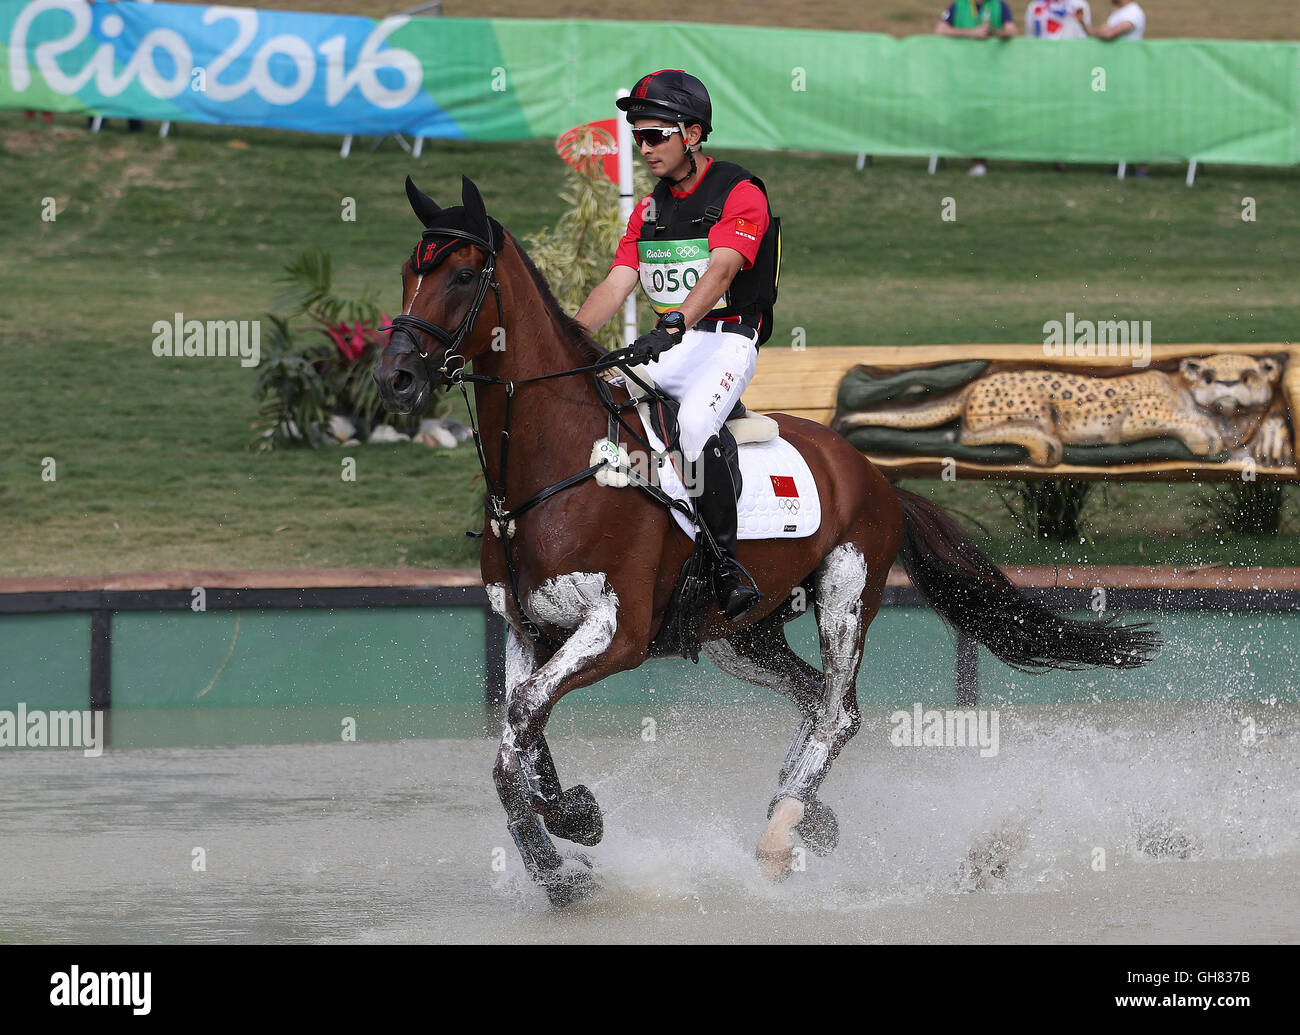 Rio de Janeiro, Brazil. 8th Aug, 2016. Alex Hua Tian of China on horse Don Geniro in action during the Eventing Cross Country of the Equestrian events at the Rio 2016 Olympic Games at the Olympic Equestrian Centre in Rio de Janeiro, Brazil, 8 August 2016. Photo: Friso Gentsch/dpa/Alamy Live News Stock Photo